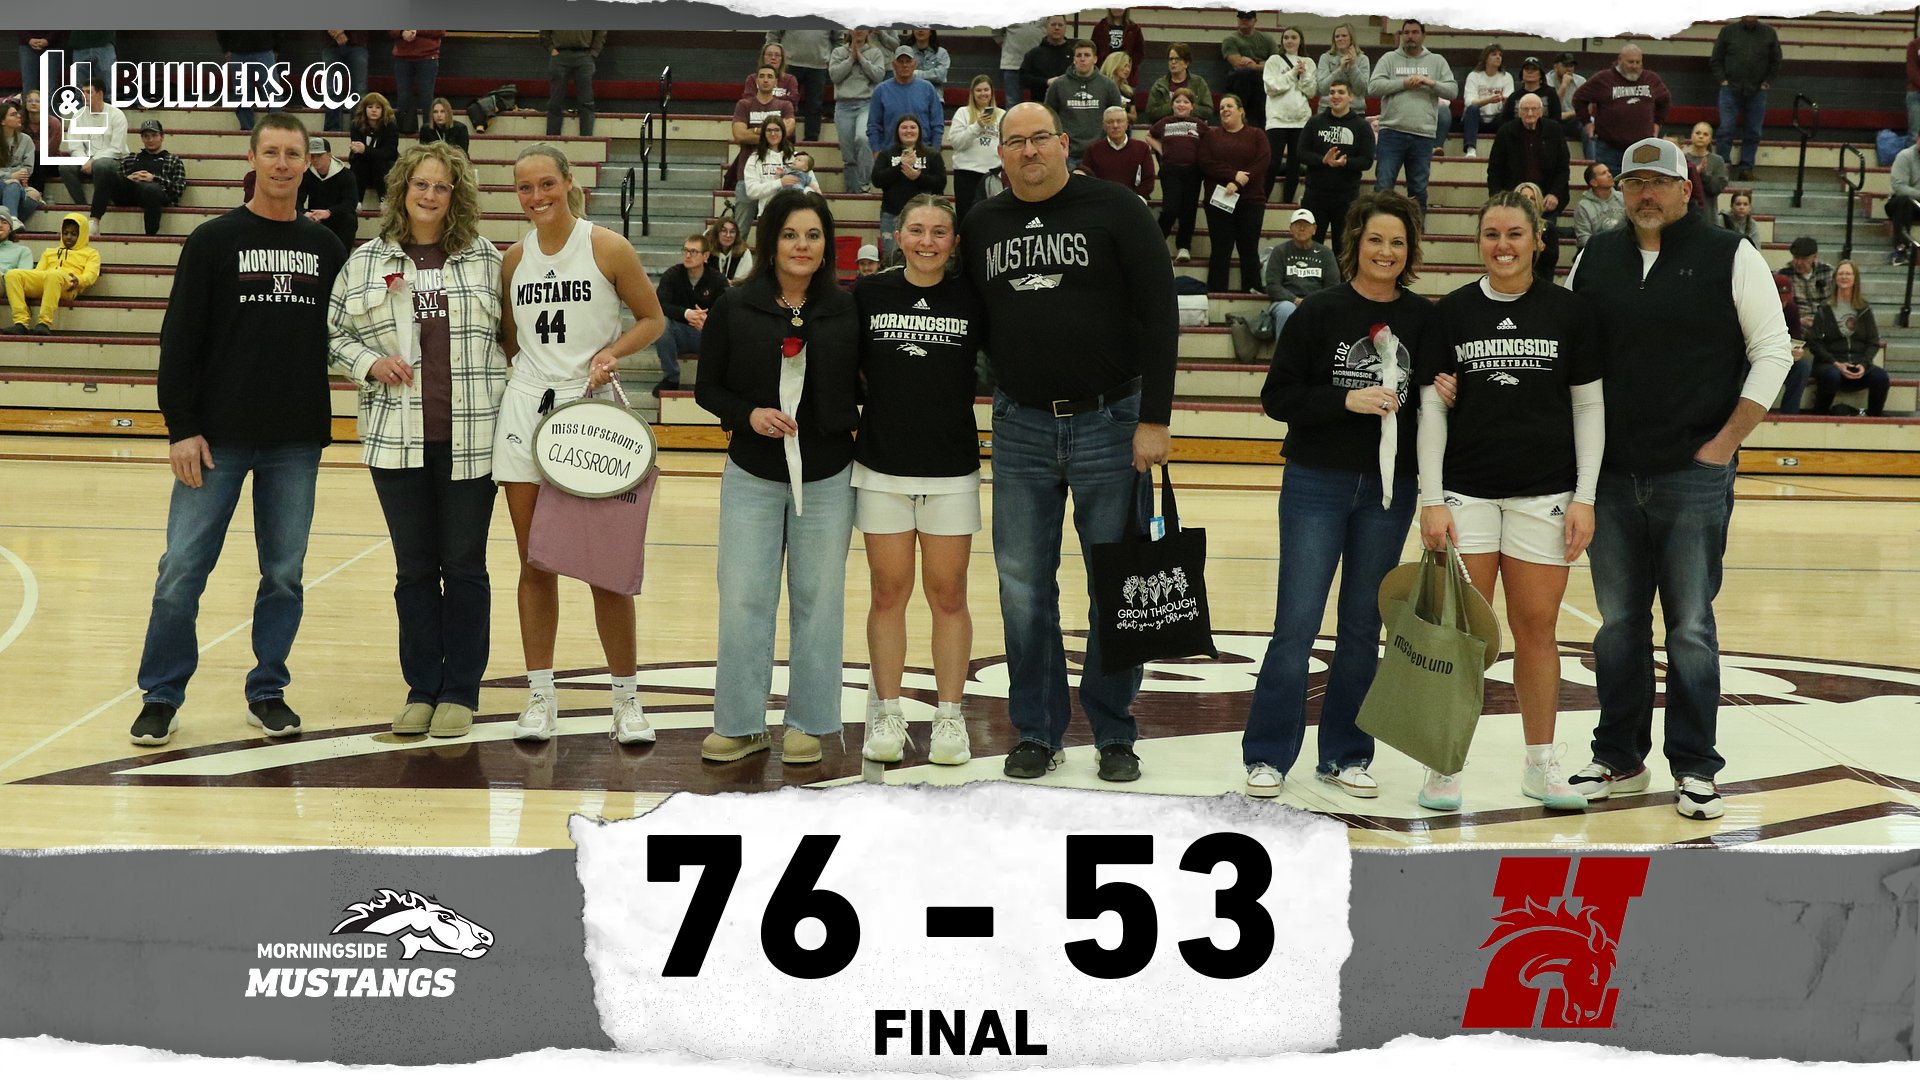 Morningside prevails 76-53 in senior day battle with Hastings